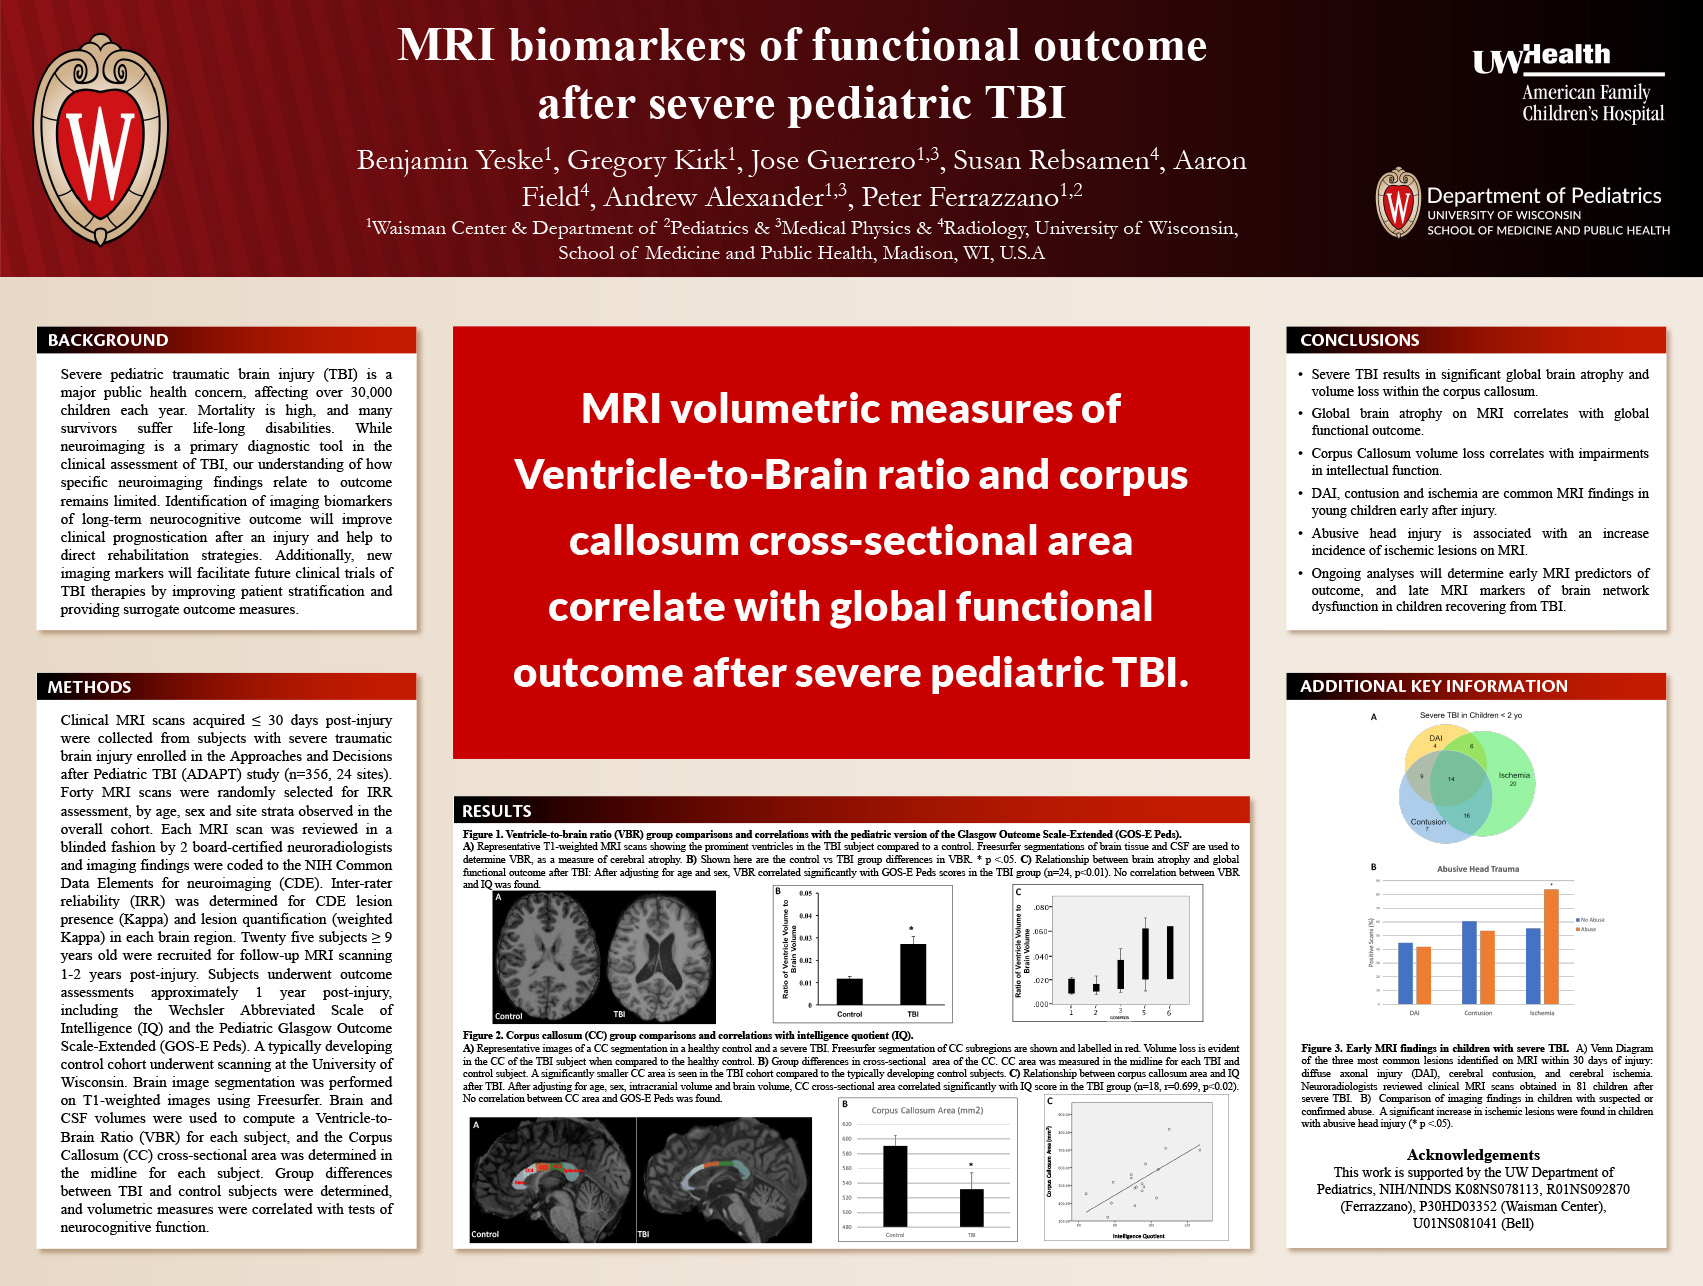 MRI Markers of Outcome after Severe Pediatric TBI poster image